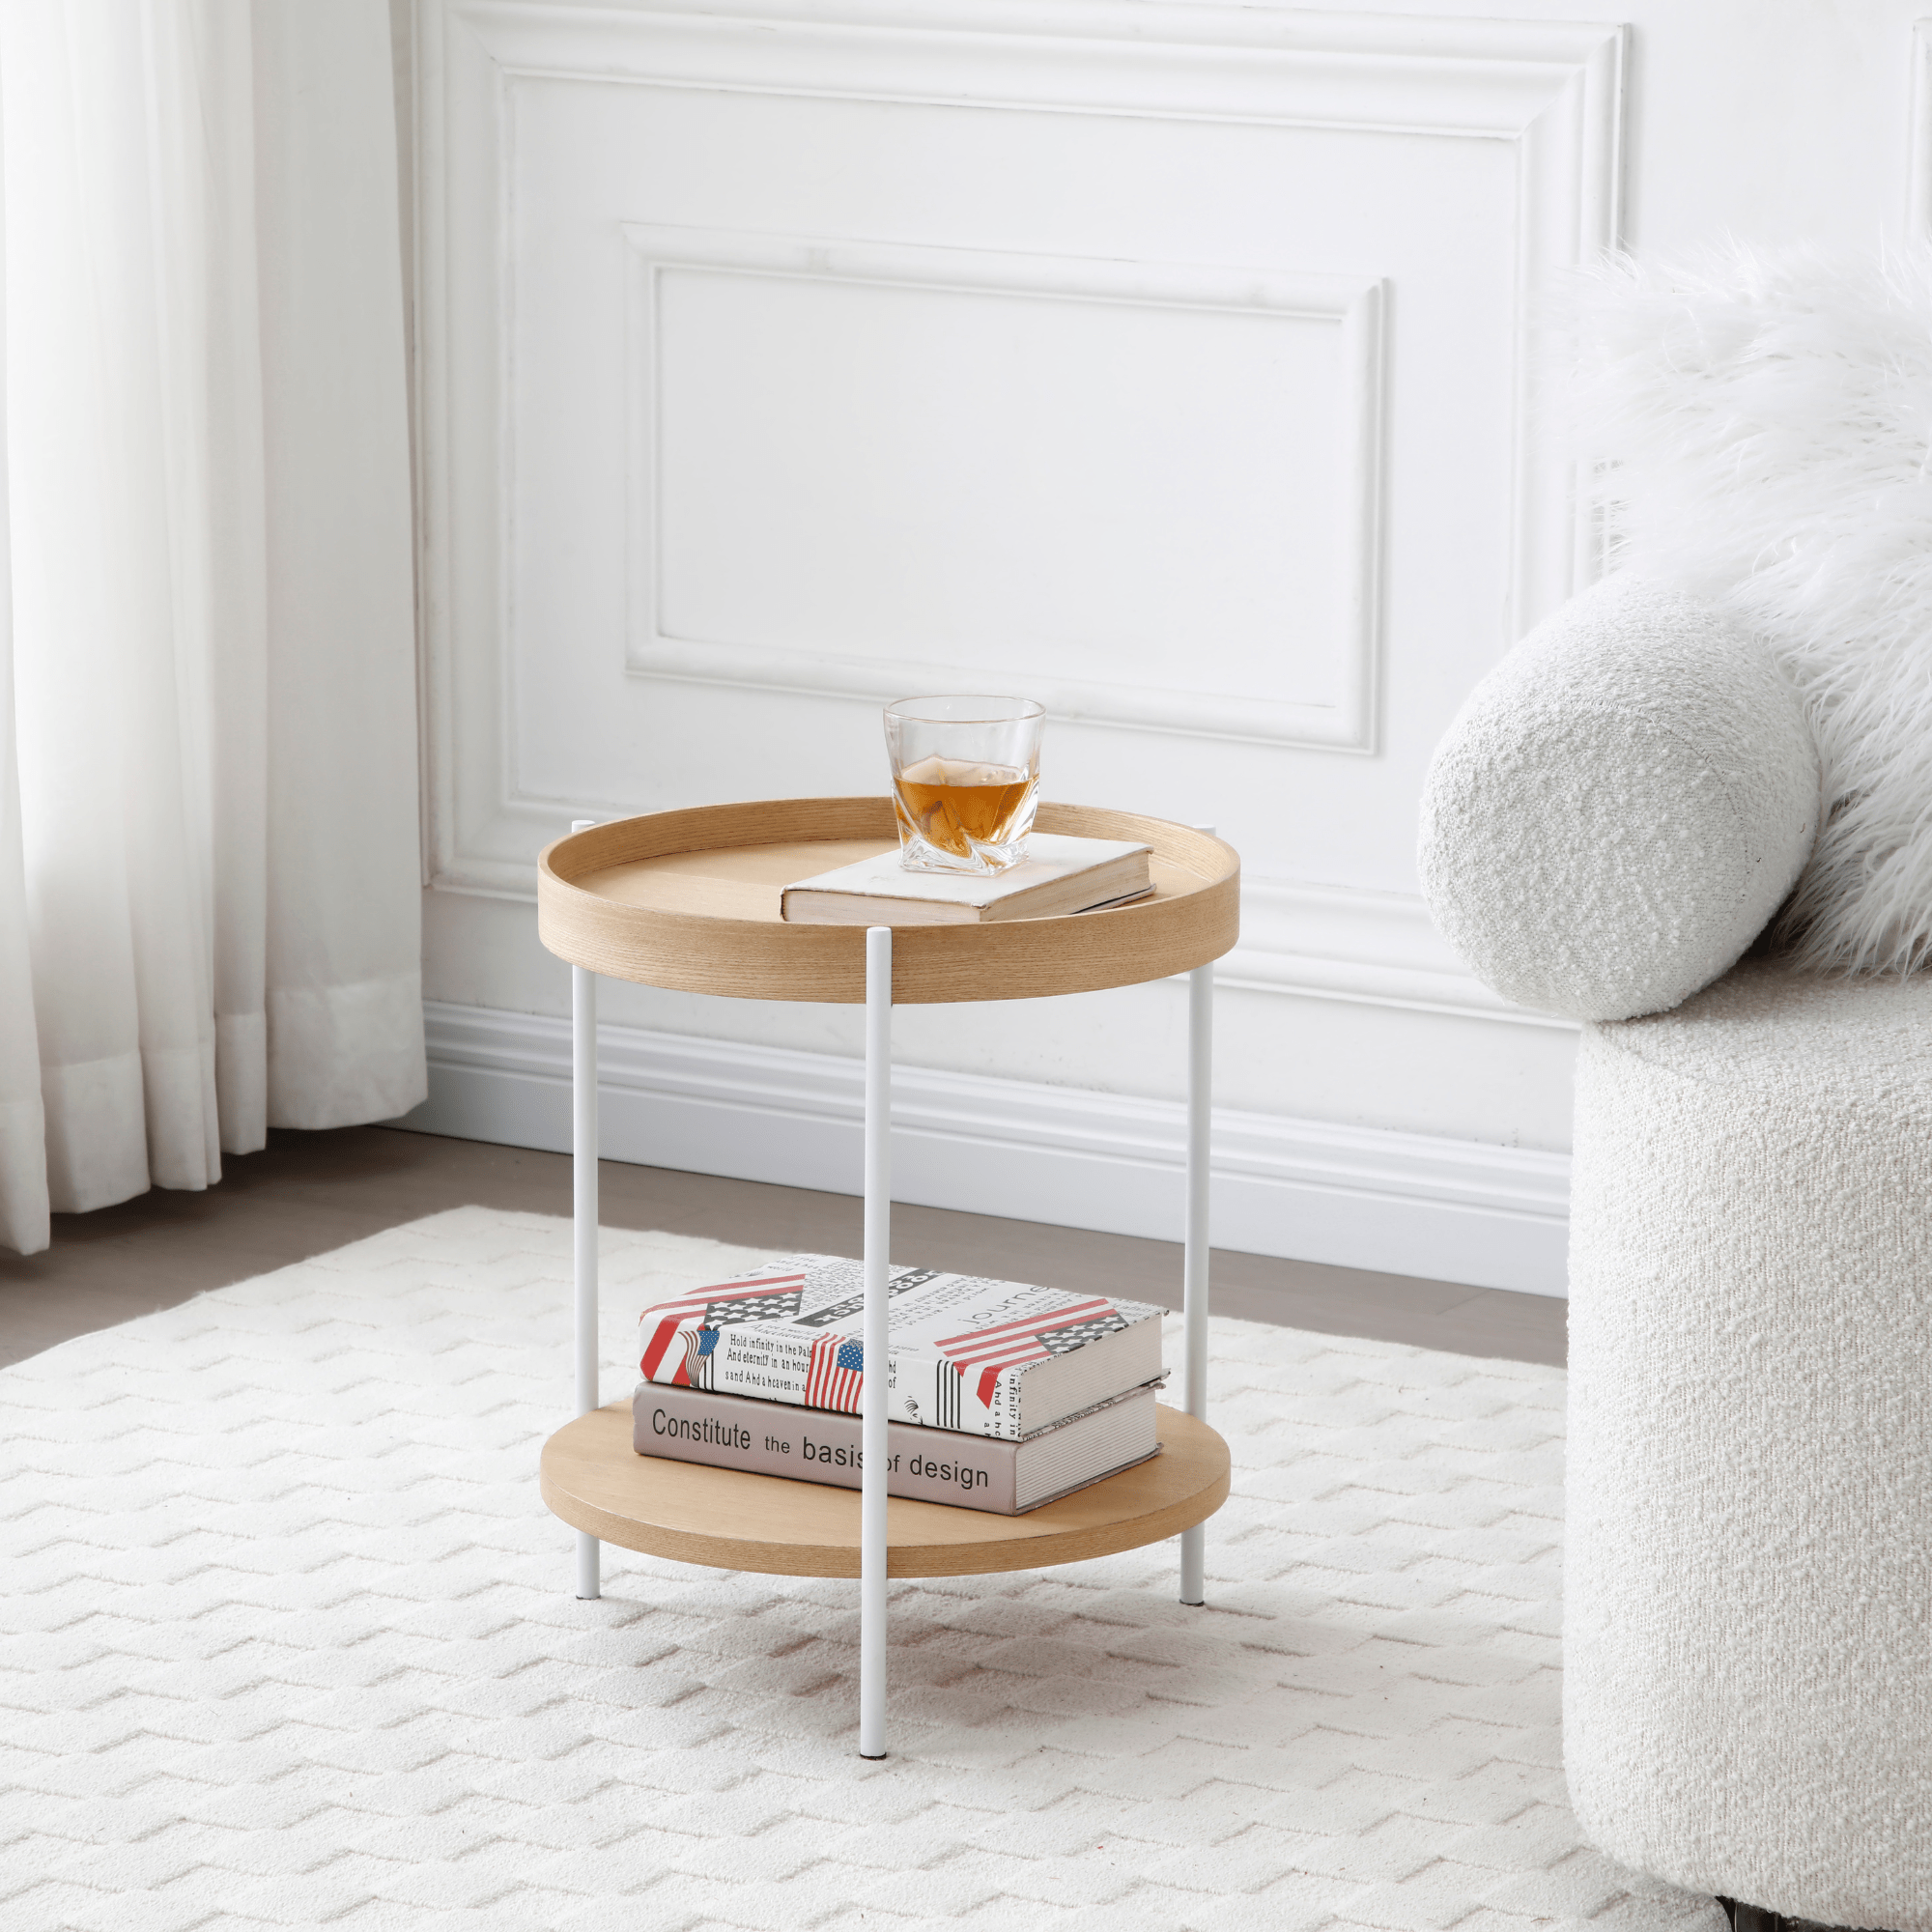 Seek & Ramble Side Tables Cleo 40cm Round Side Table With Storage Shelf Ash White Legs